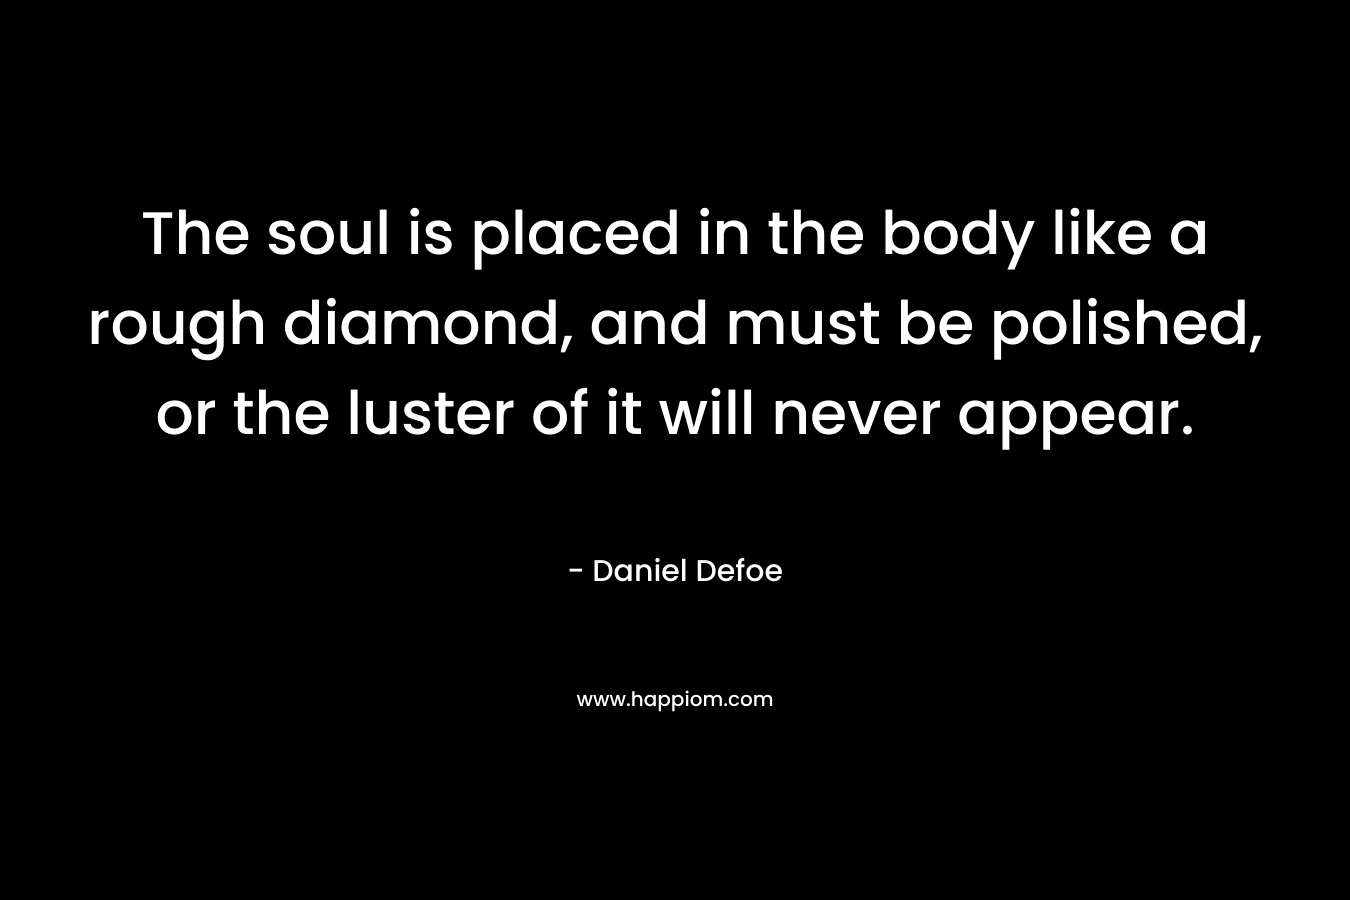 The soul is placed in the body like a rough diamond, and must be polished, or the luster of it will never appear. – Daniel Defoe